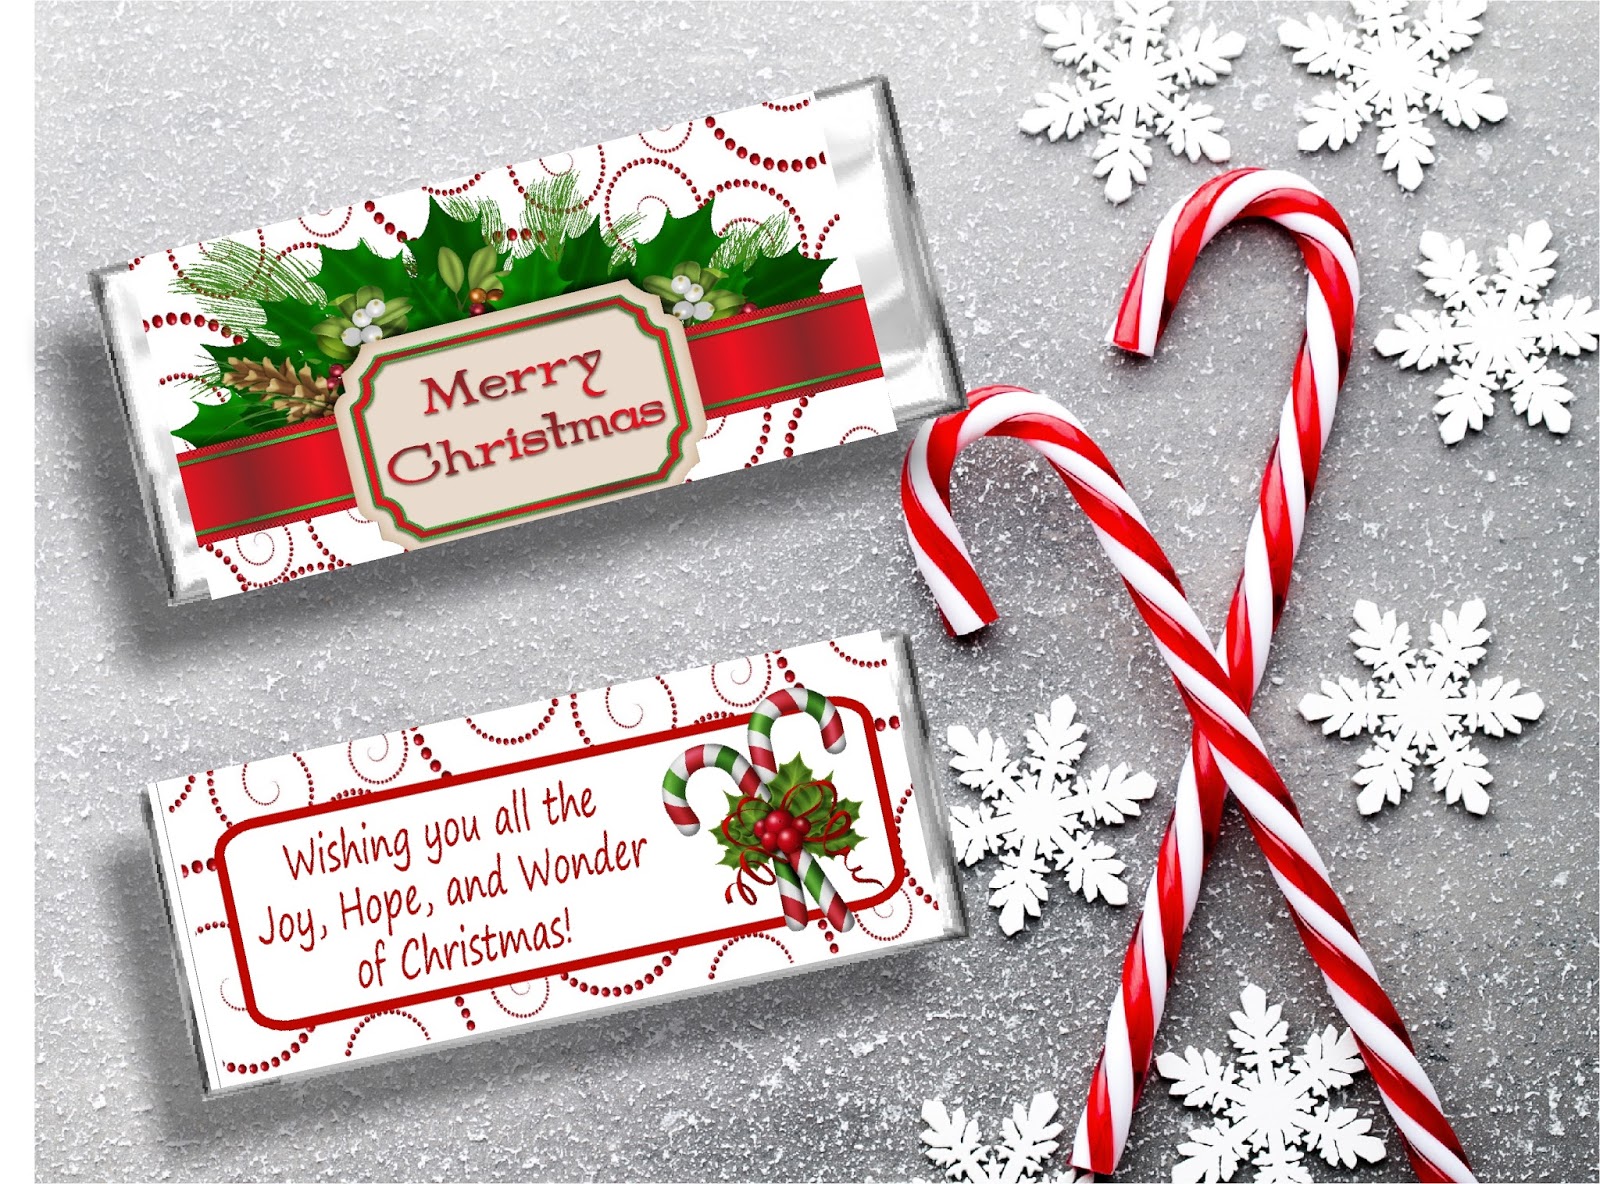 diy-party-mom-merry-christmas-printable-candy-bar-wrapper